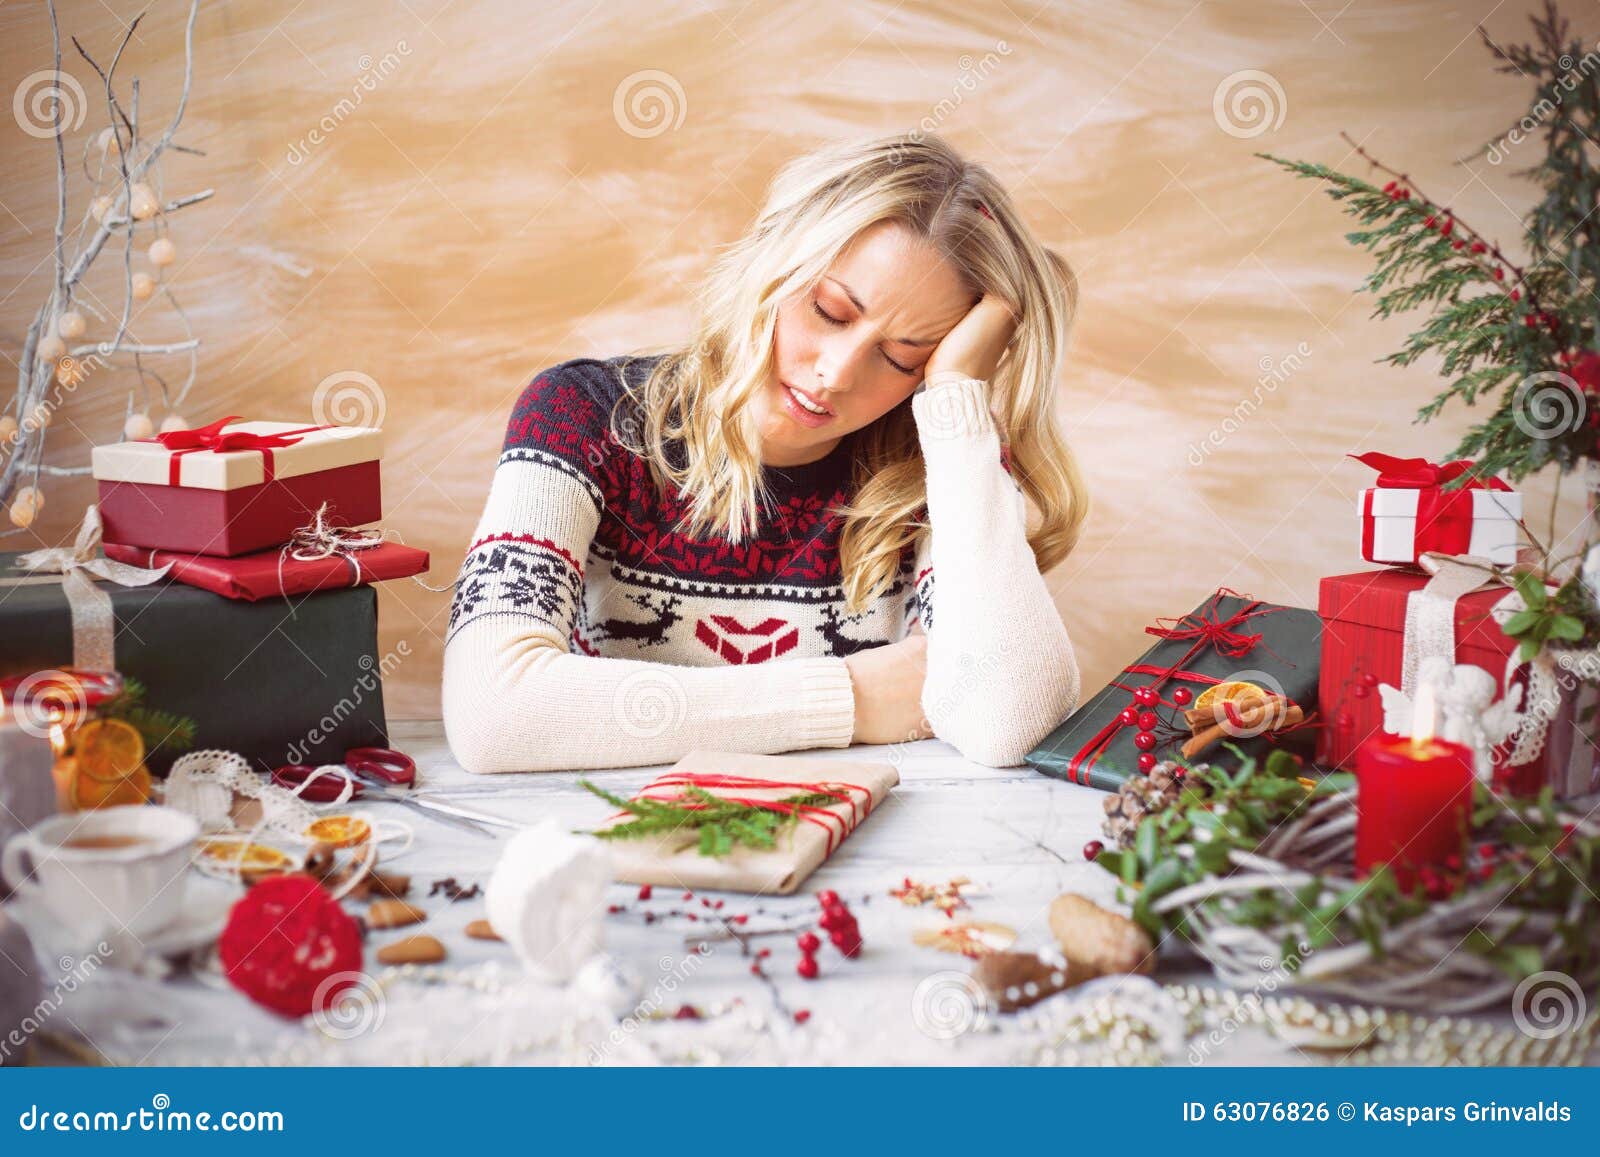 woman tired of gift wrapping